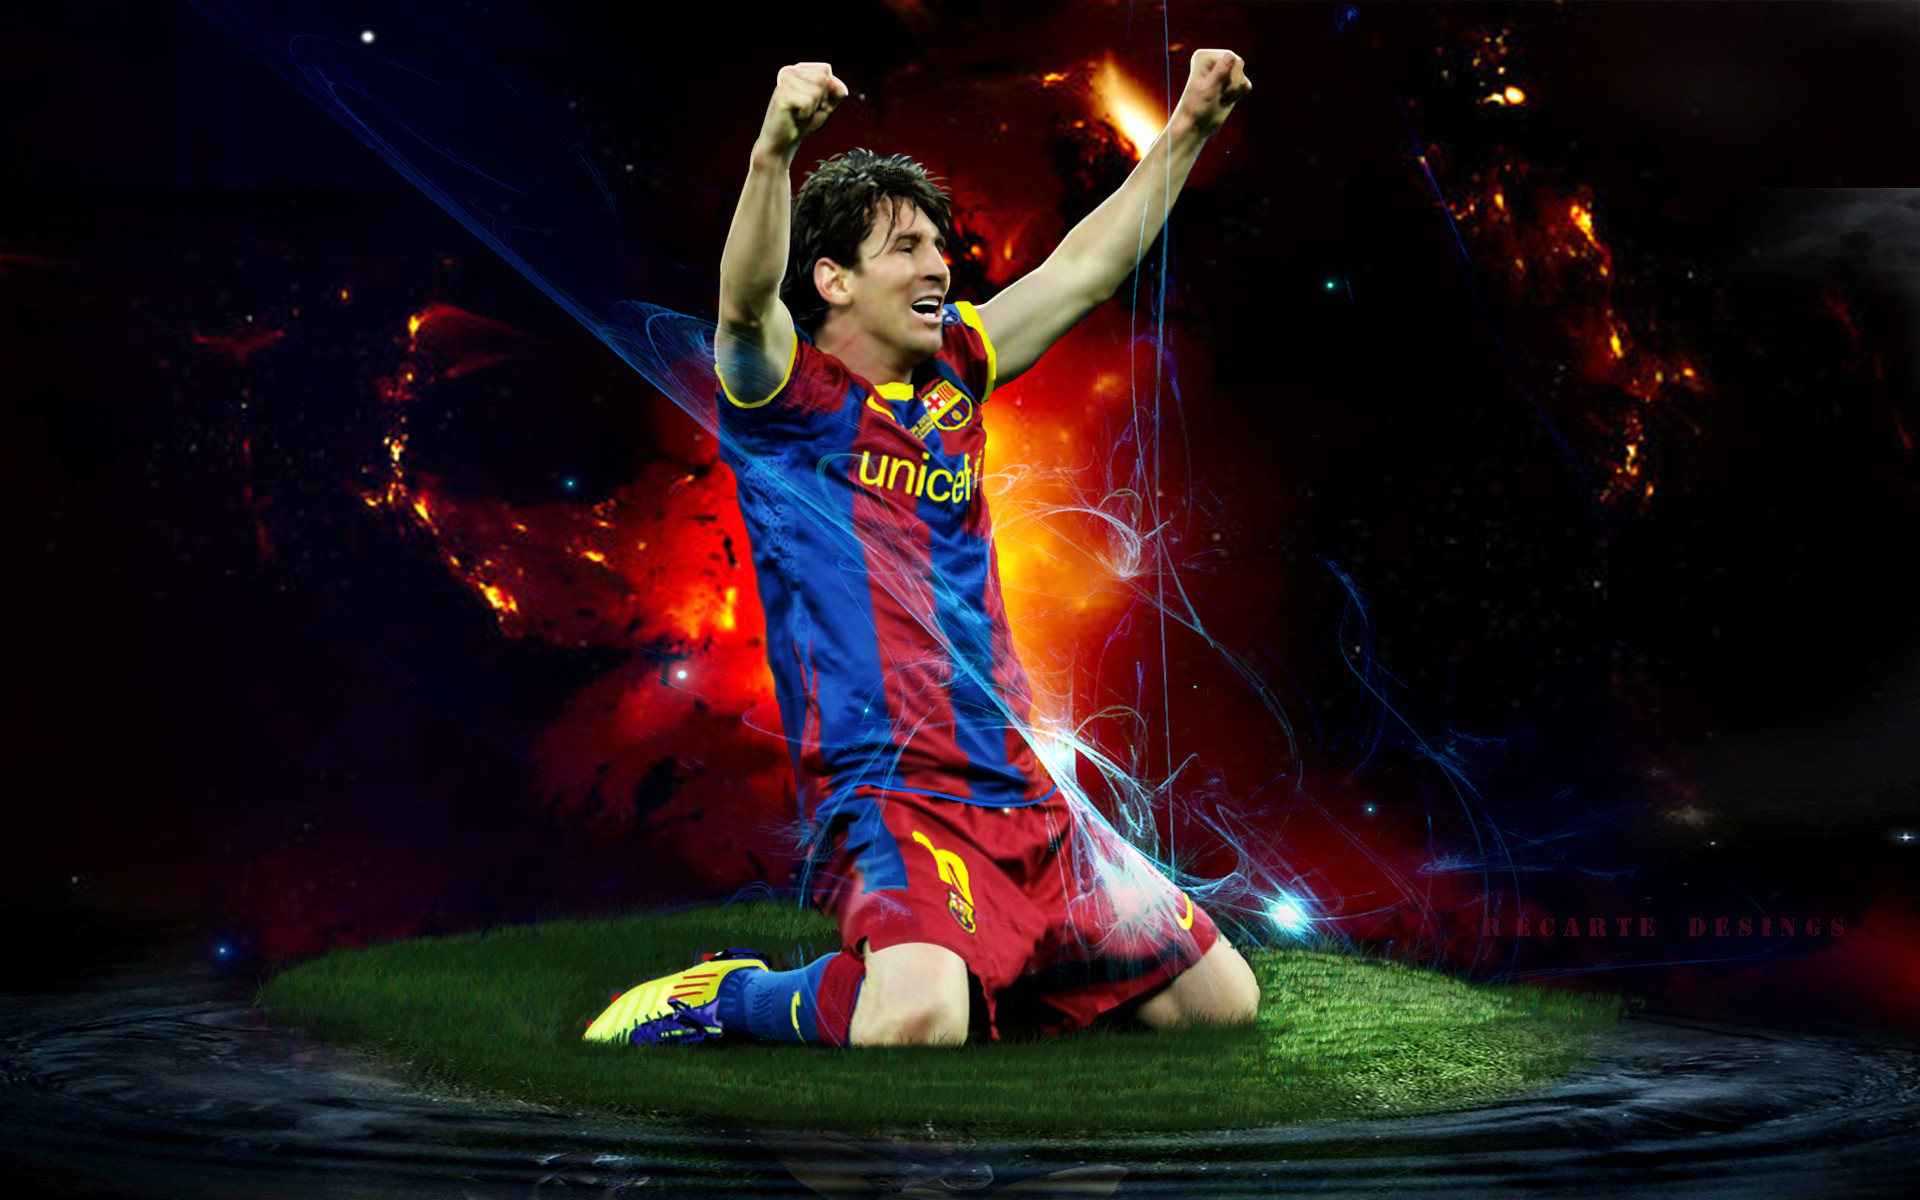  Download 40 Lionel Messi HD Wallpapers 1920x1200